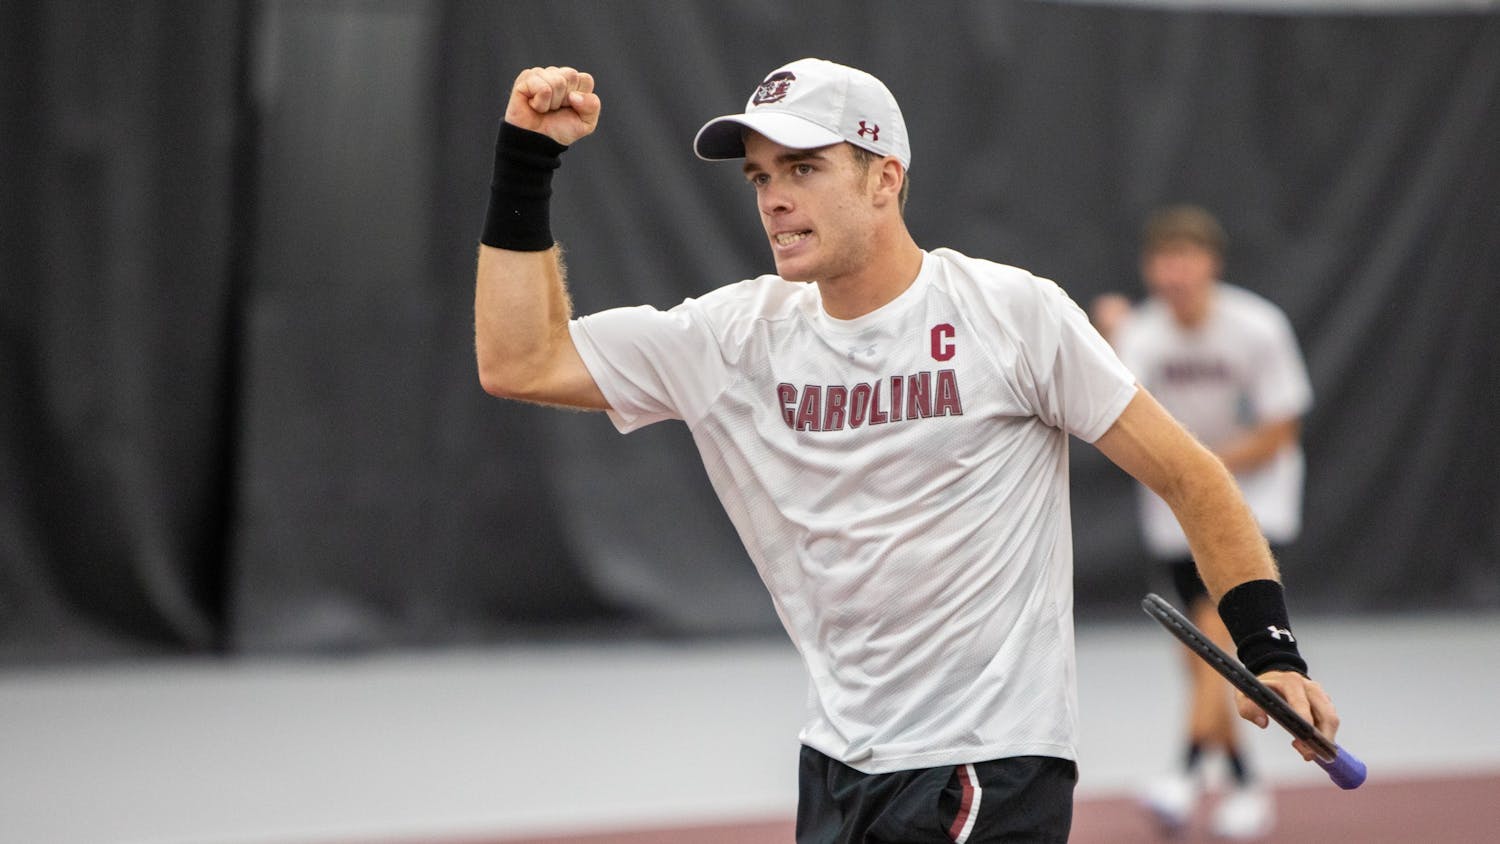 Junior Daniel Rodrigues celebrates after a point. The Gamecocks beat Mississippi State 5-2.